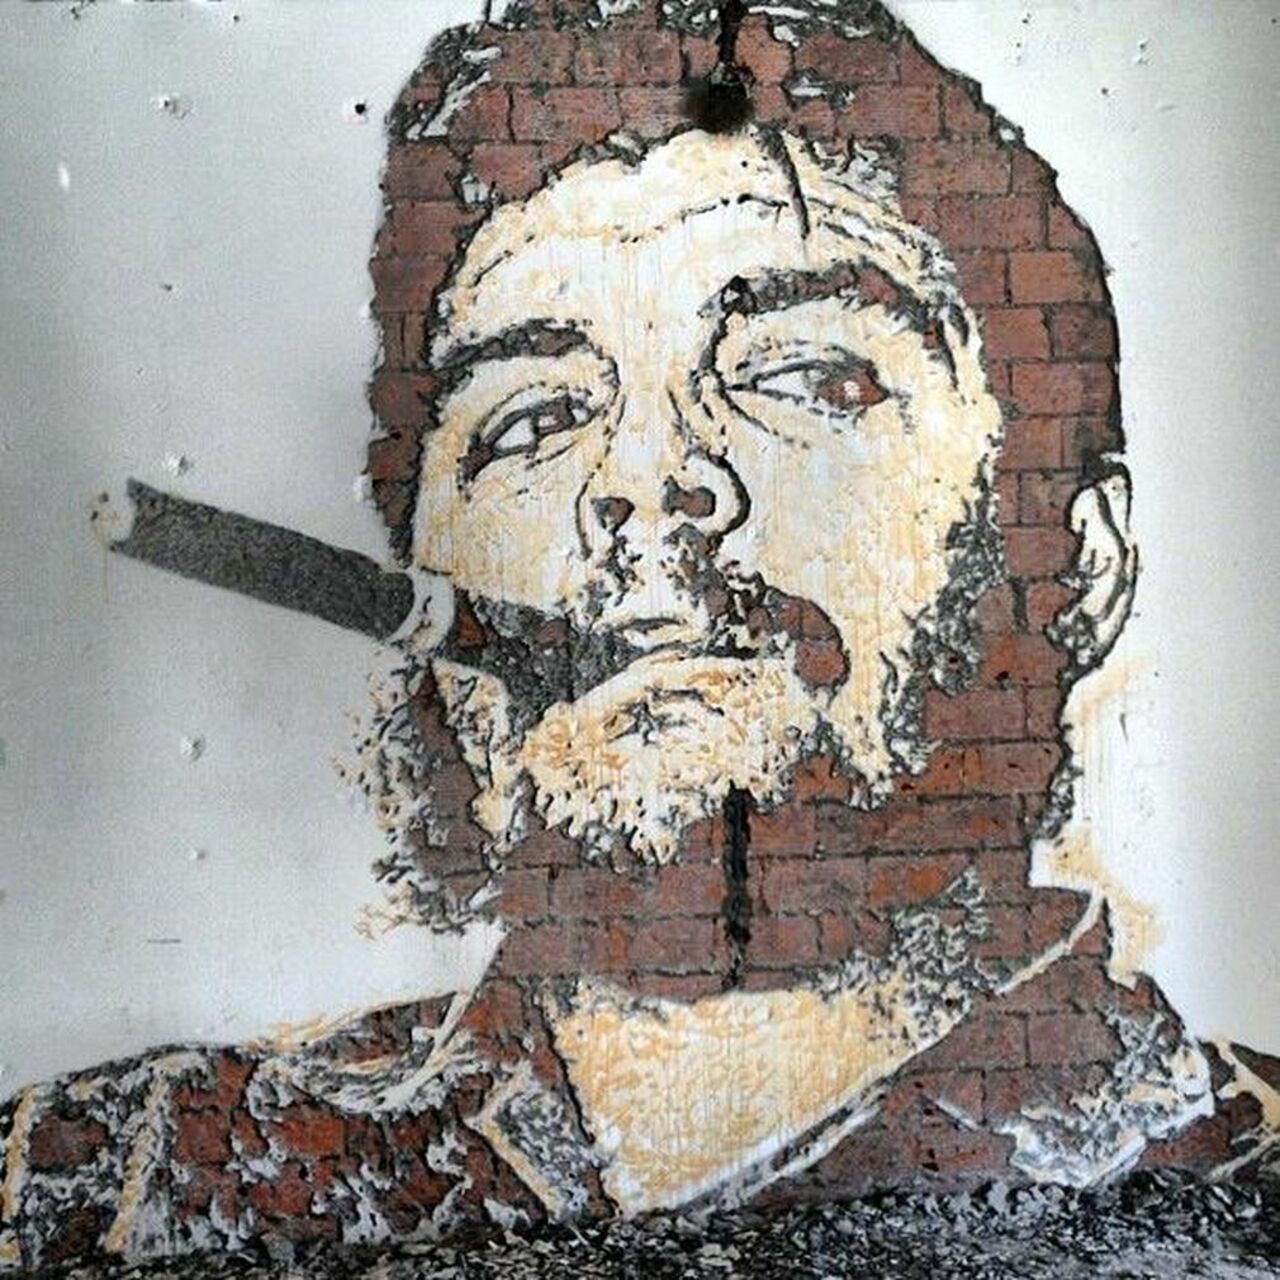 #StreetartSaturday #Streetart #AlexandreFarto clearly enjoys working with old brick walls that have been plastered. https://t.co/q9nyeE4WN9